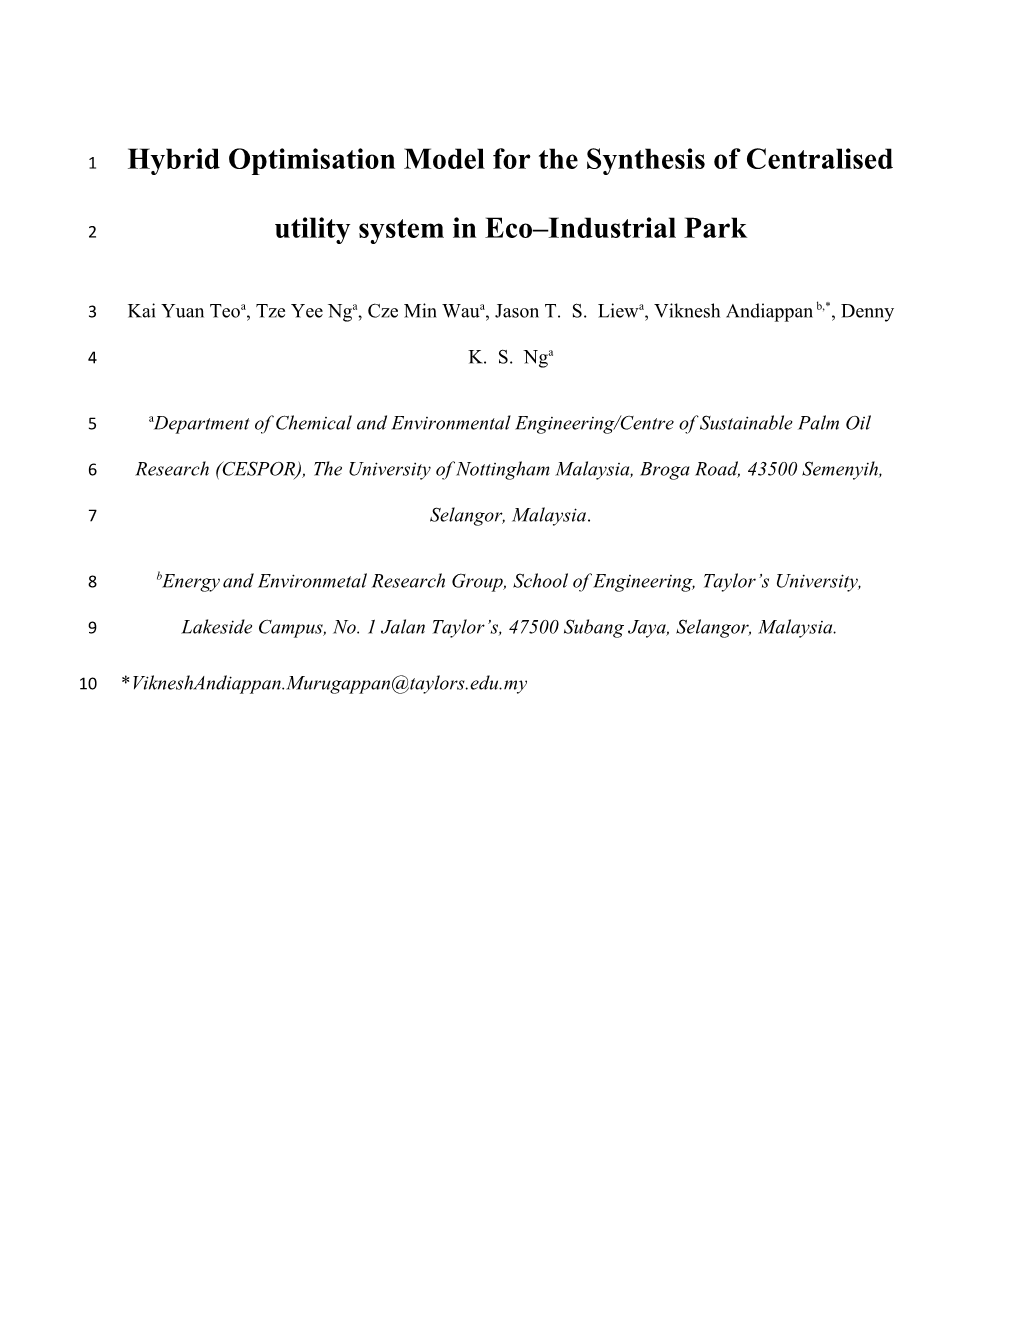 Hybrid Optimisation Model for the Synthesis of Centralised Utility System in Eco Industrial